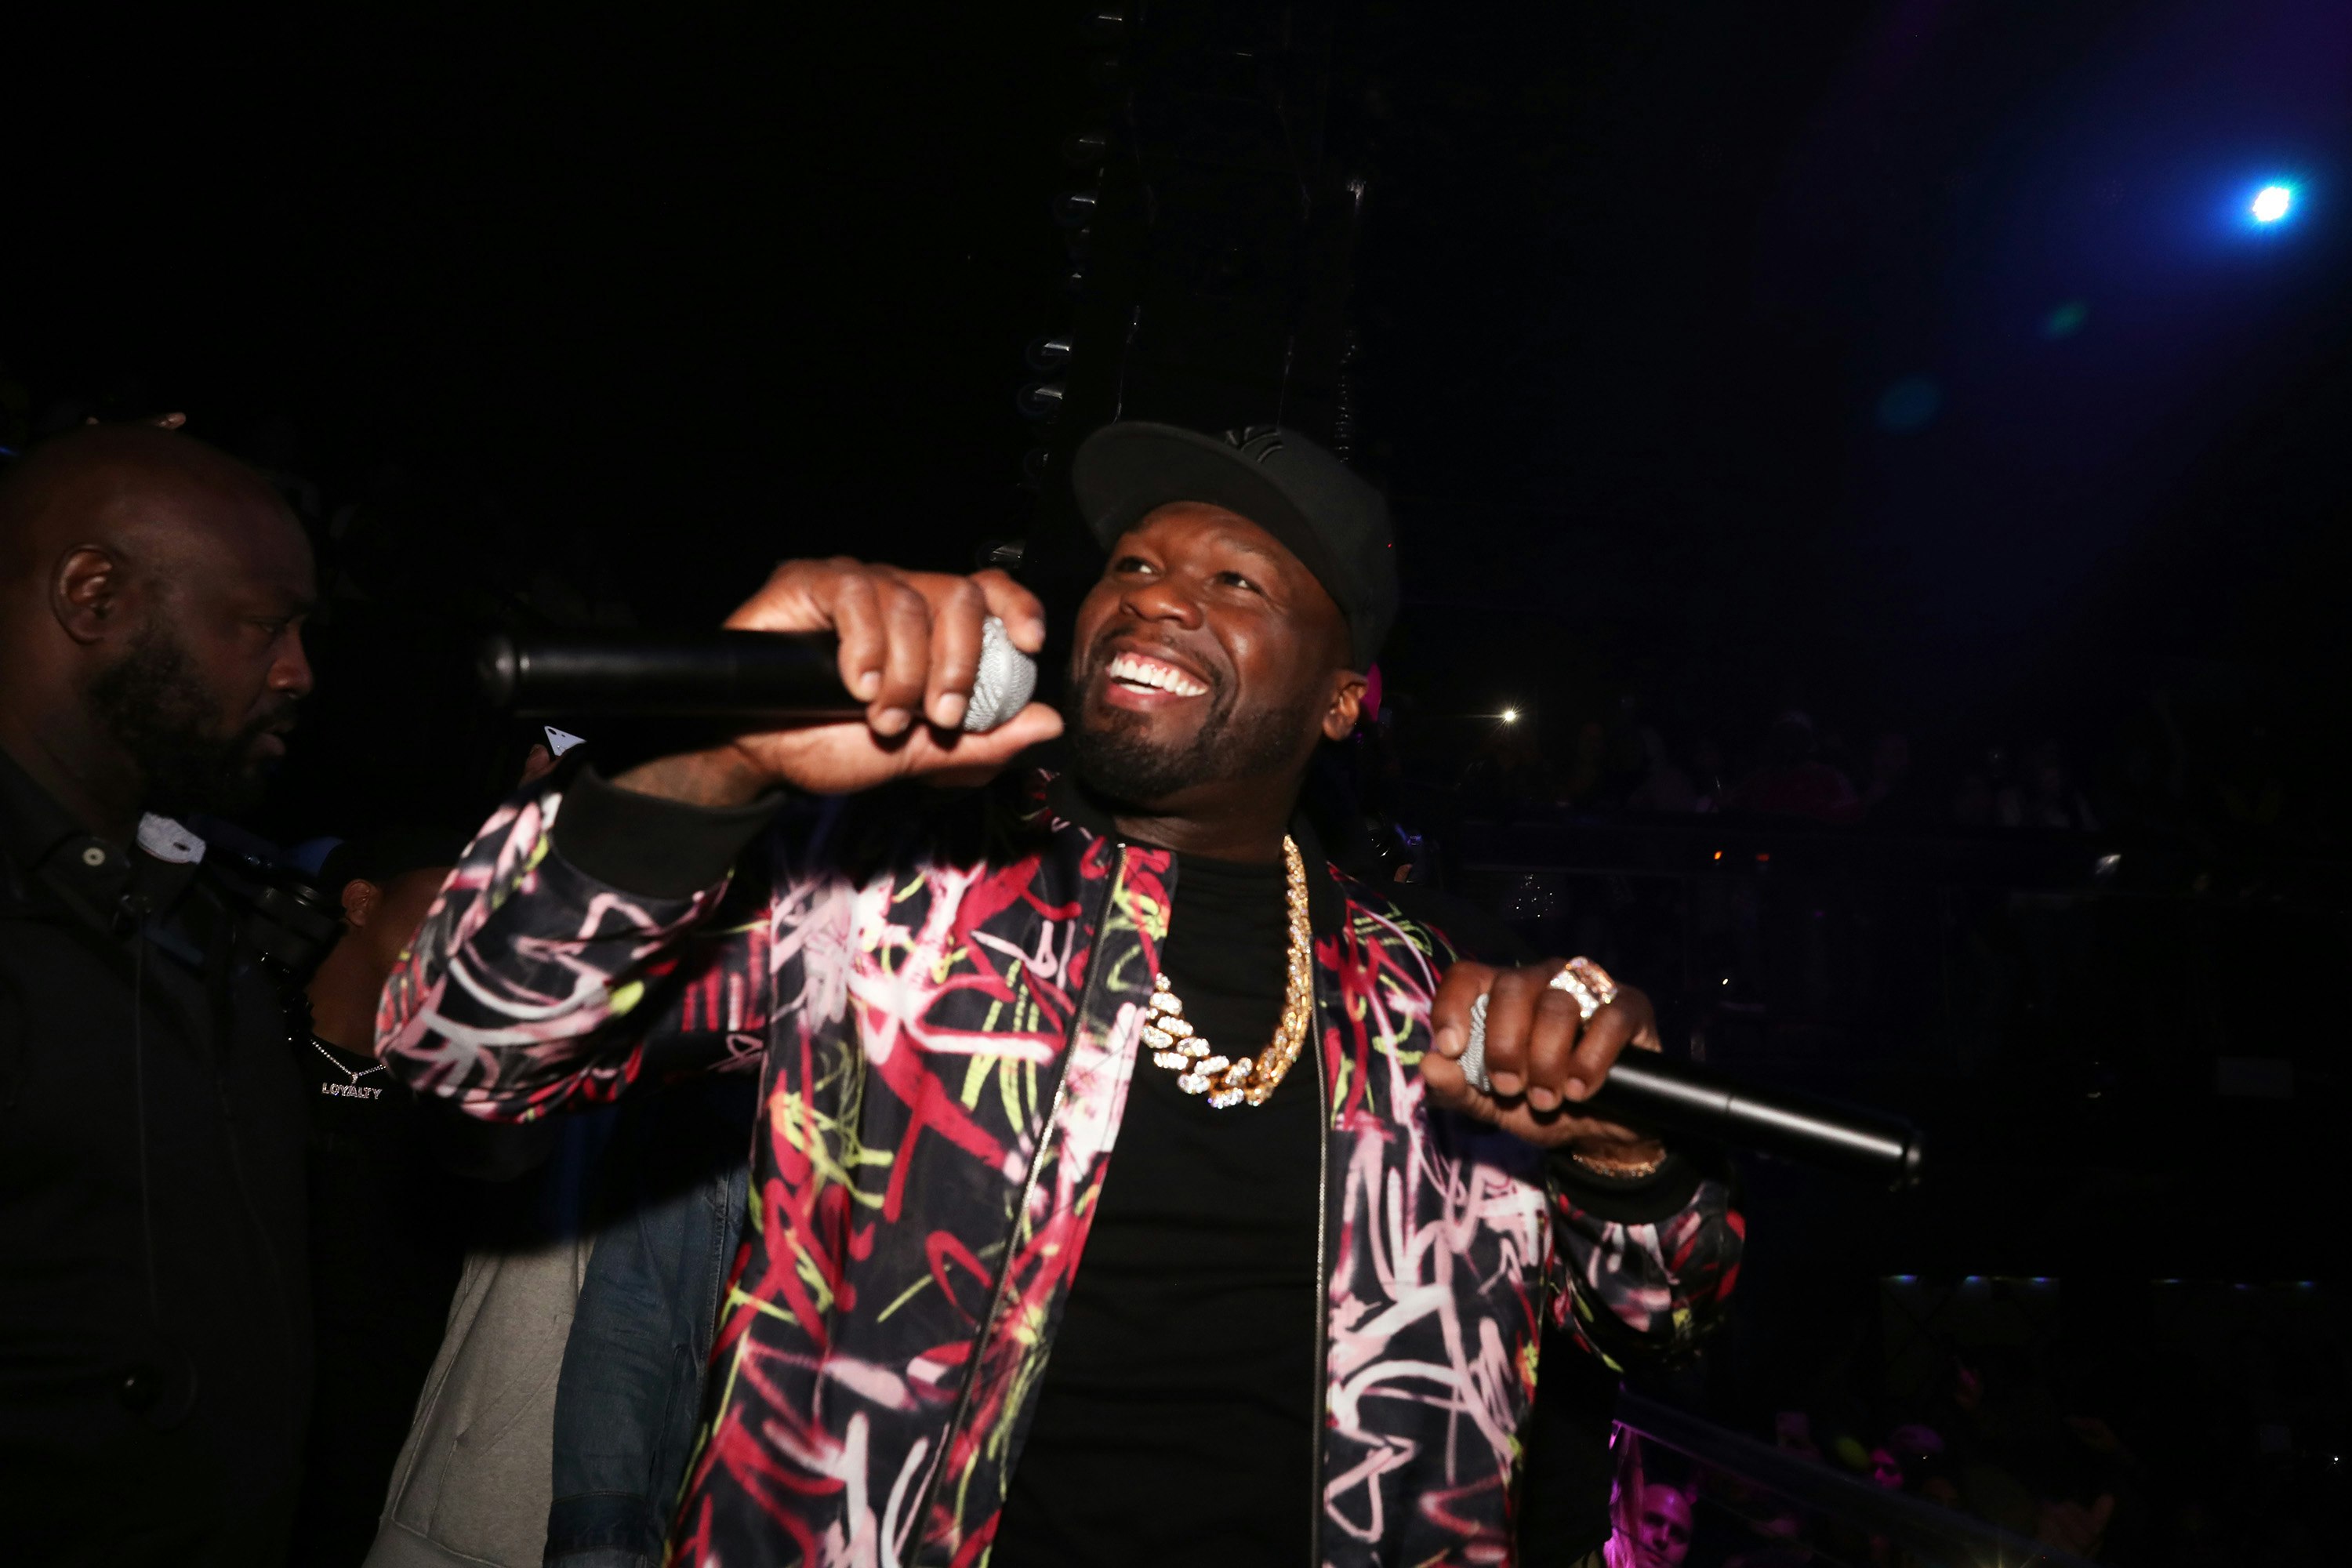 The rapper 50 Cent performs live in a club. Editorial use only